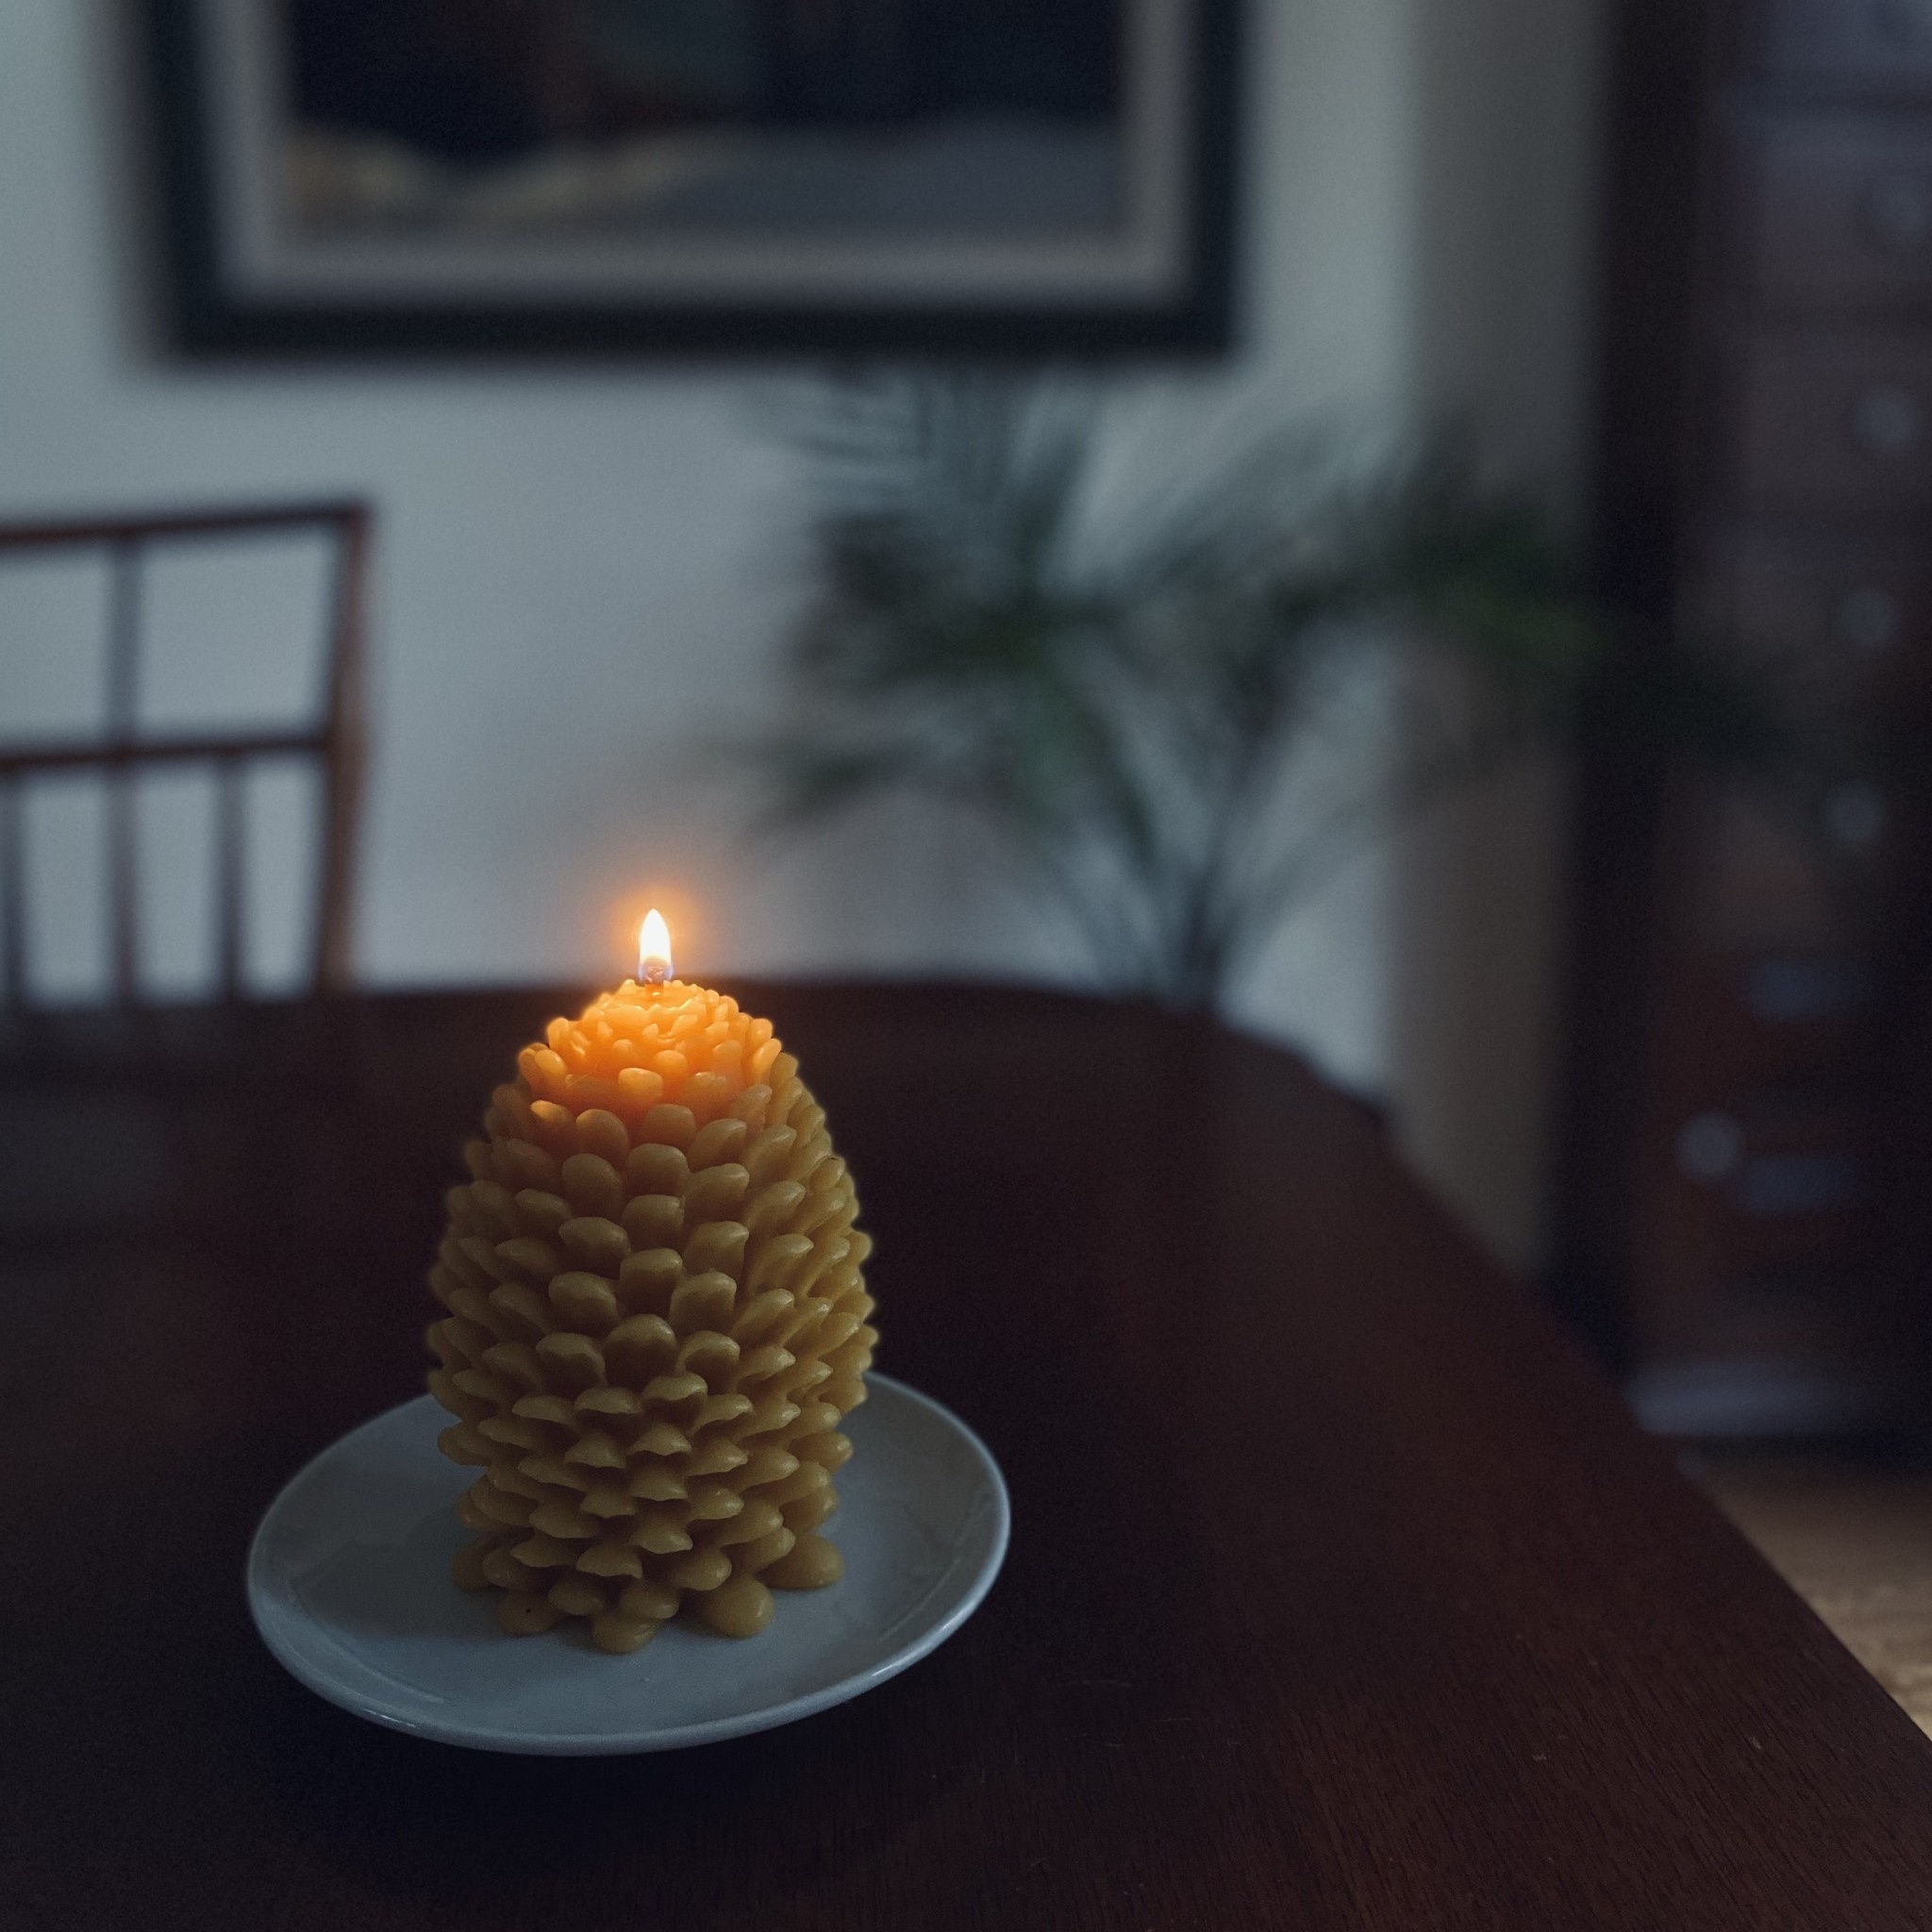 Old Mill Candles Jumbo Beeswax Pinecone